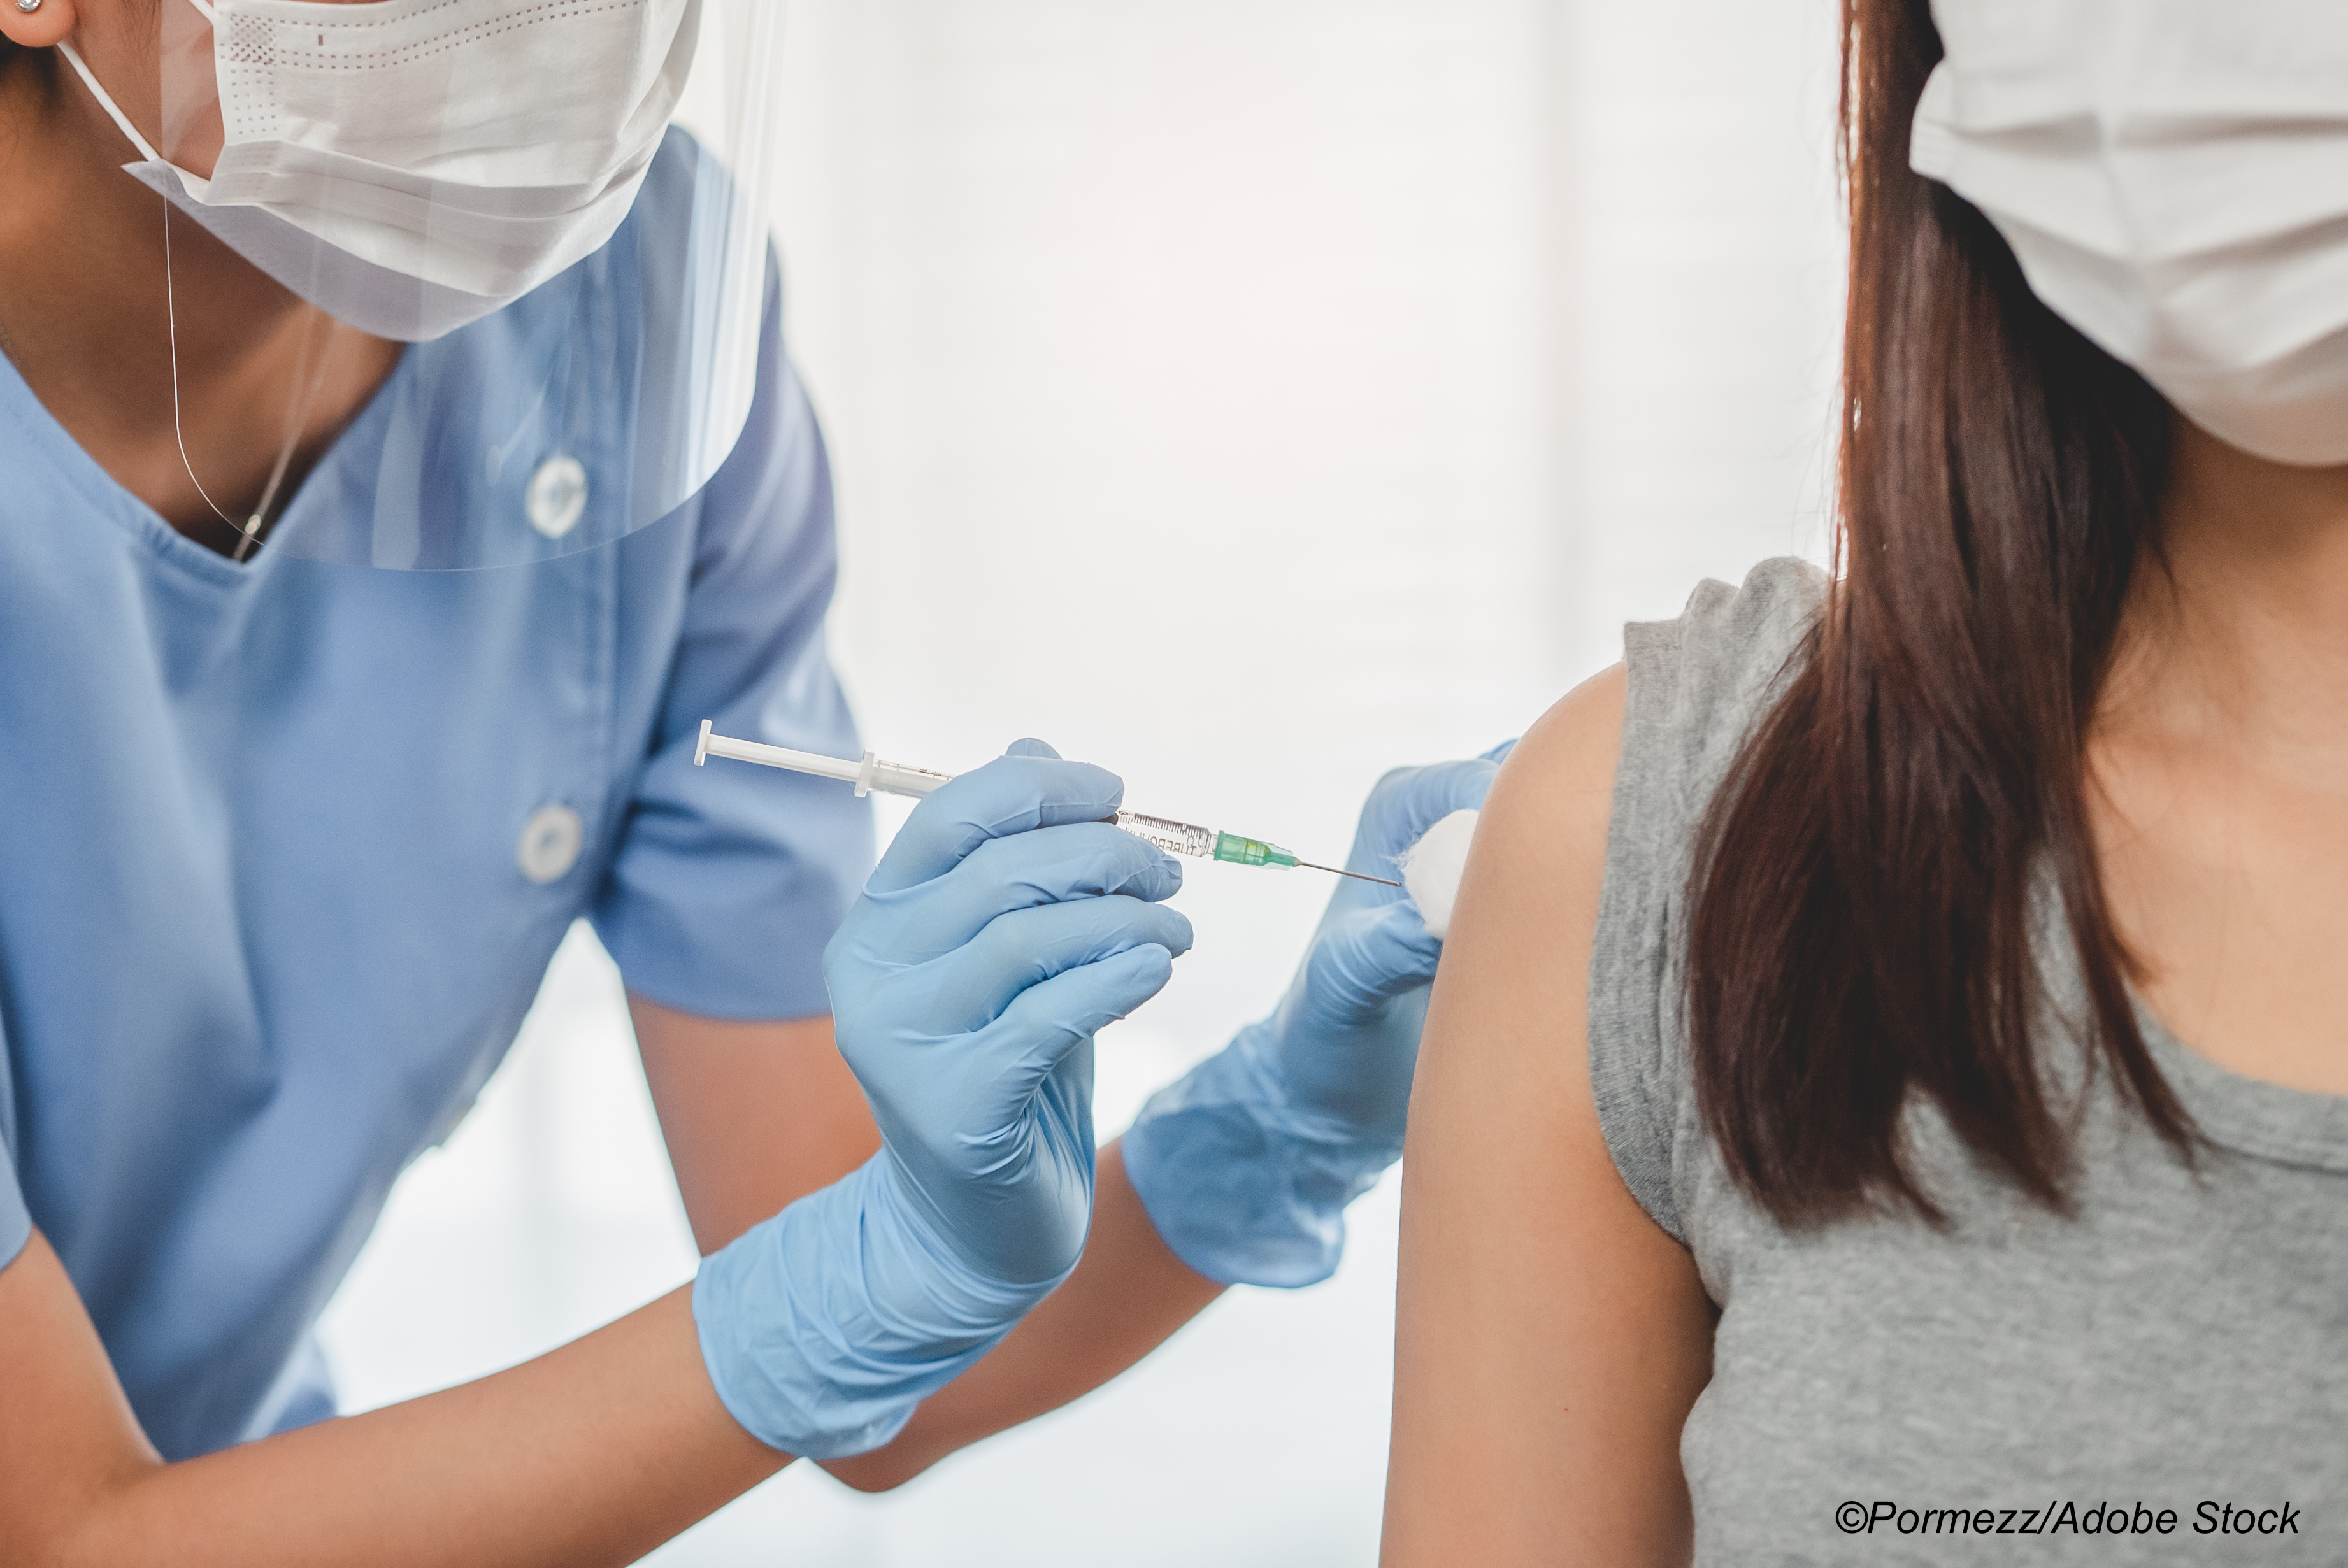 Giving Covid-19, Flu Vaccines Together Is Safe, Study Finds